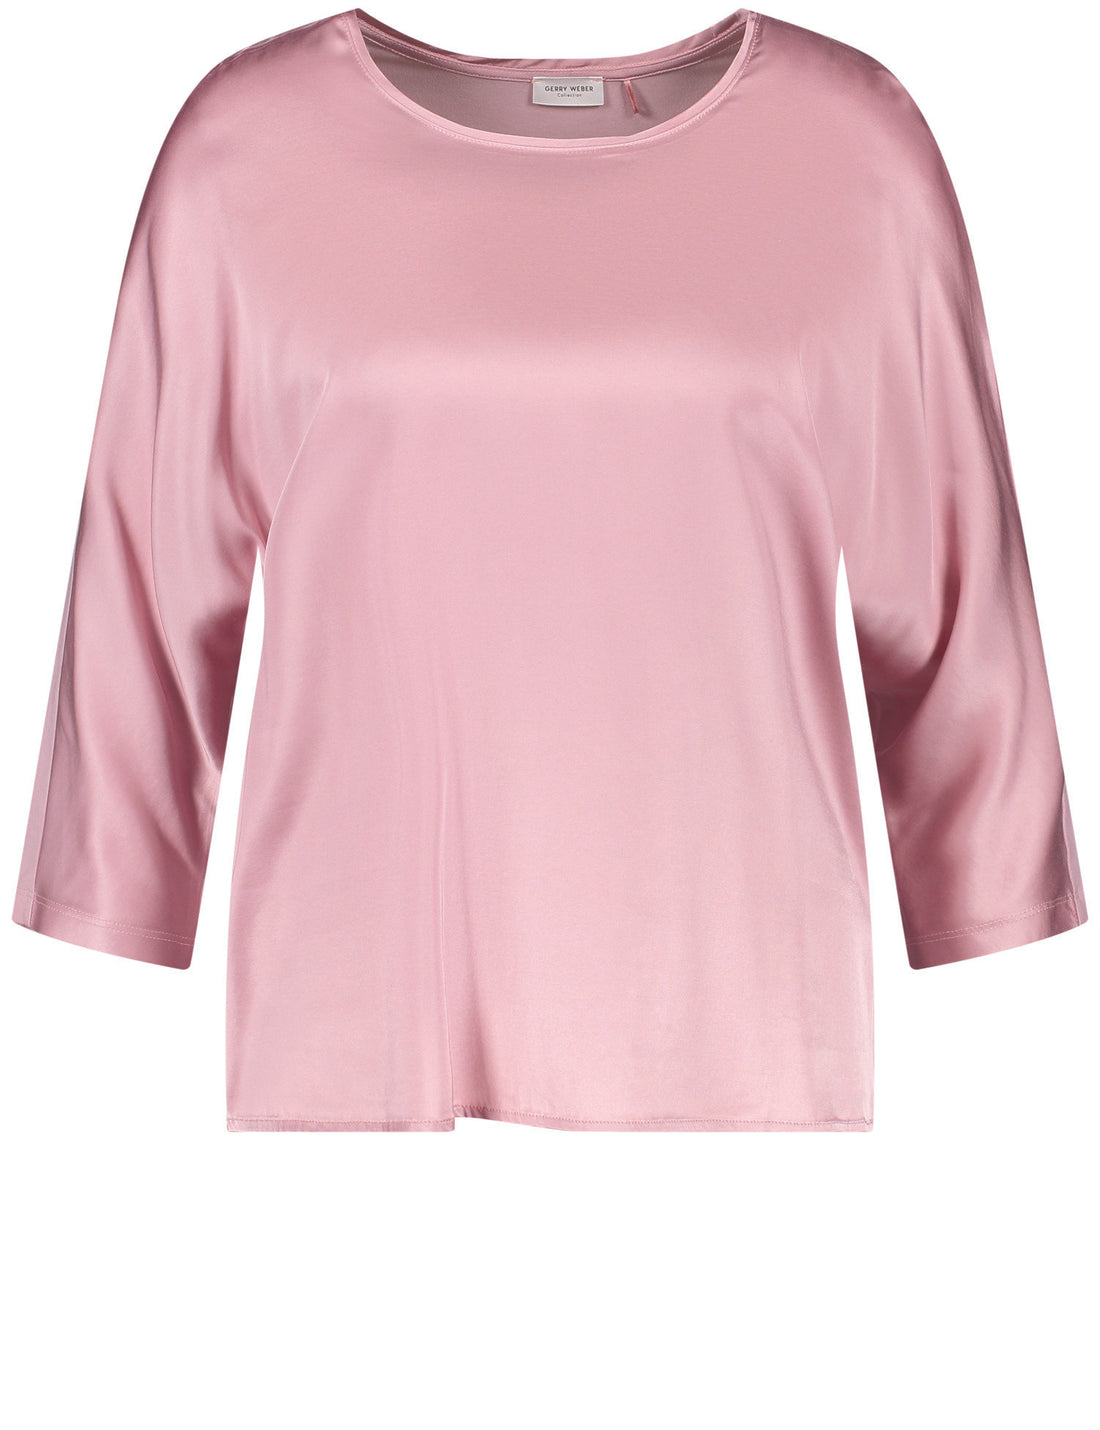 3/4 Sleeve Top With A Fabric Panel And A Subtle Sheen_270229-35033_30907_02